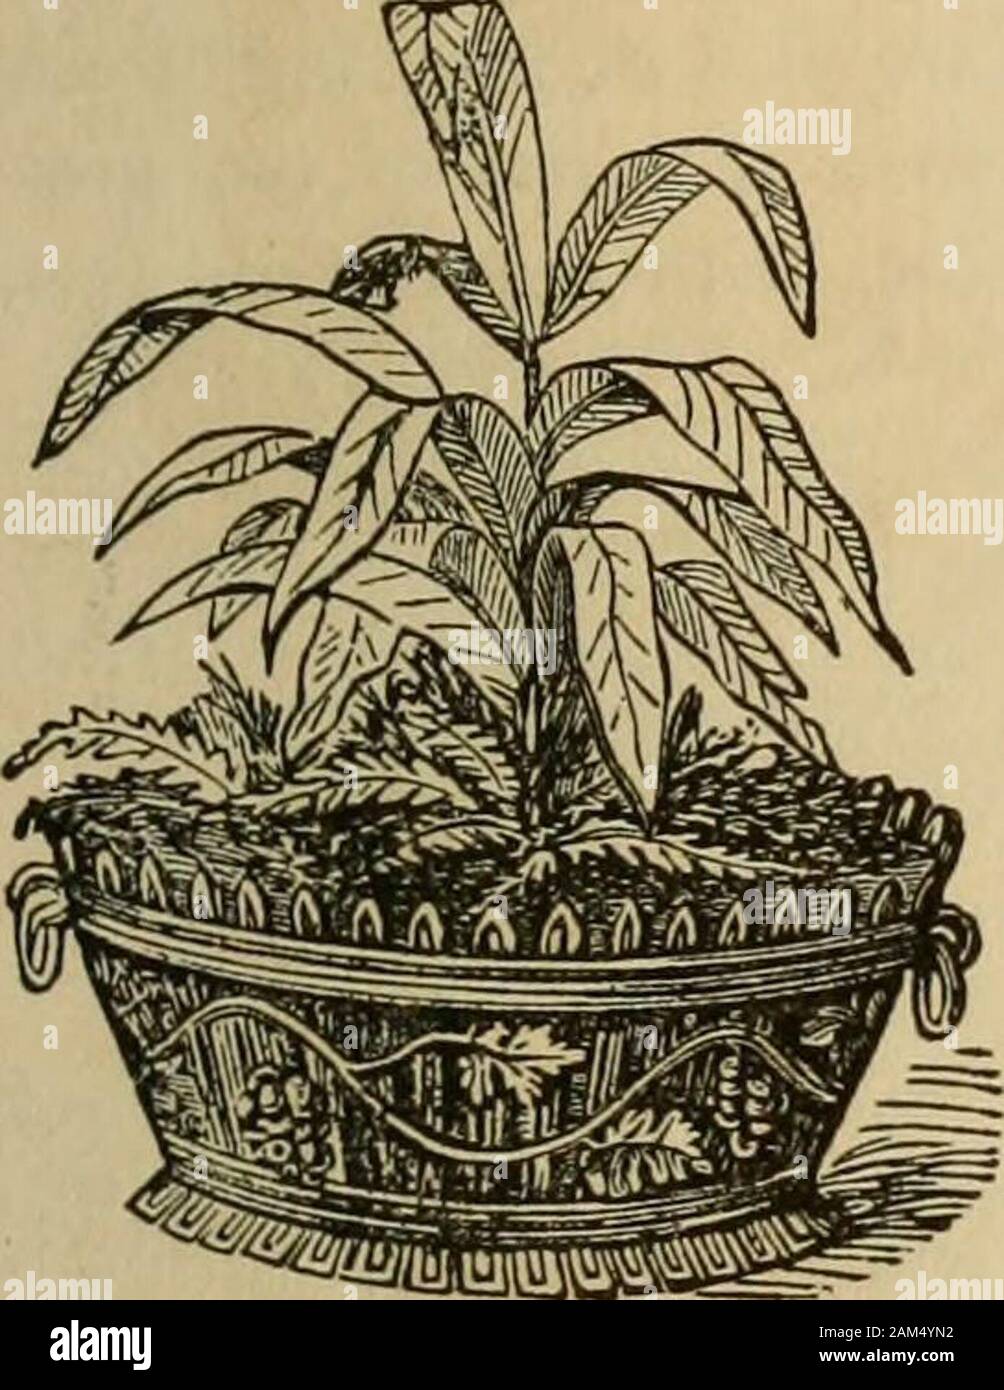 Window gardening : devoted specially to the culture of flowers and ornamental plants for indoor use and parlor decoration . GARDENING. ol An exceedingly ornamental design for a flower pot for a drawing room is shownin (Fig. 27,) made of Minton tile, the ground work of which is dark blue and theflowers white. All such decorative pots impart a pleasant tasteful look to anyroom. We would be glad to have them multiplied and constantly improved.Fig. 28, is of the same material, but of various shades of white, red and green. Jaidinieres.These are fanciful, single or double boxes, of more artistic co Stock Photo